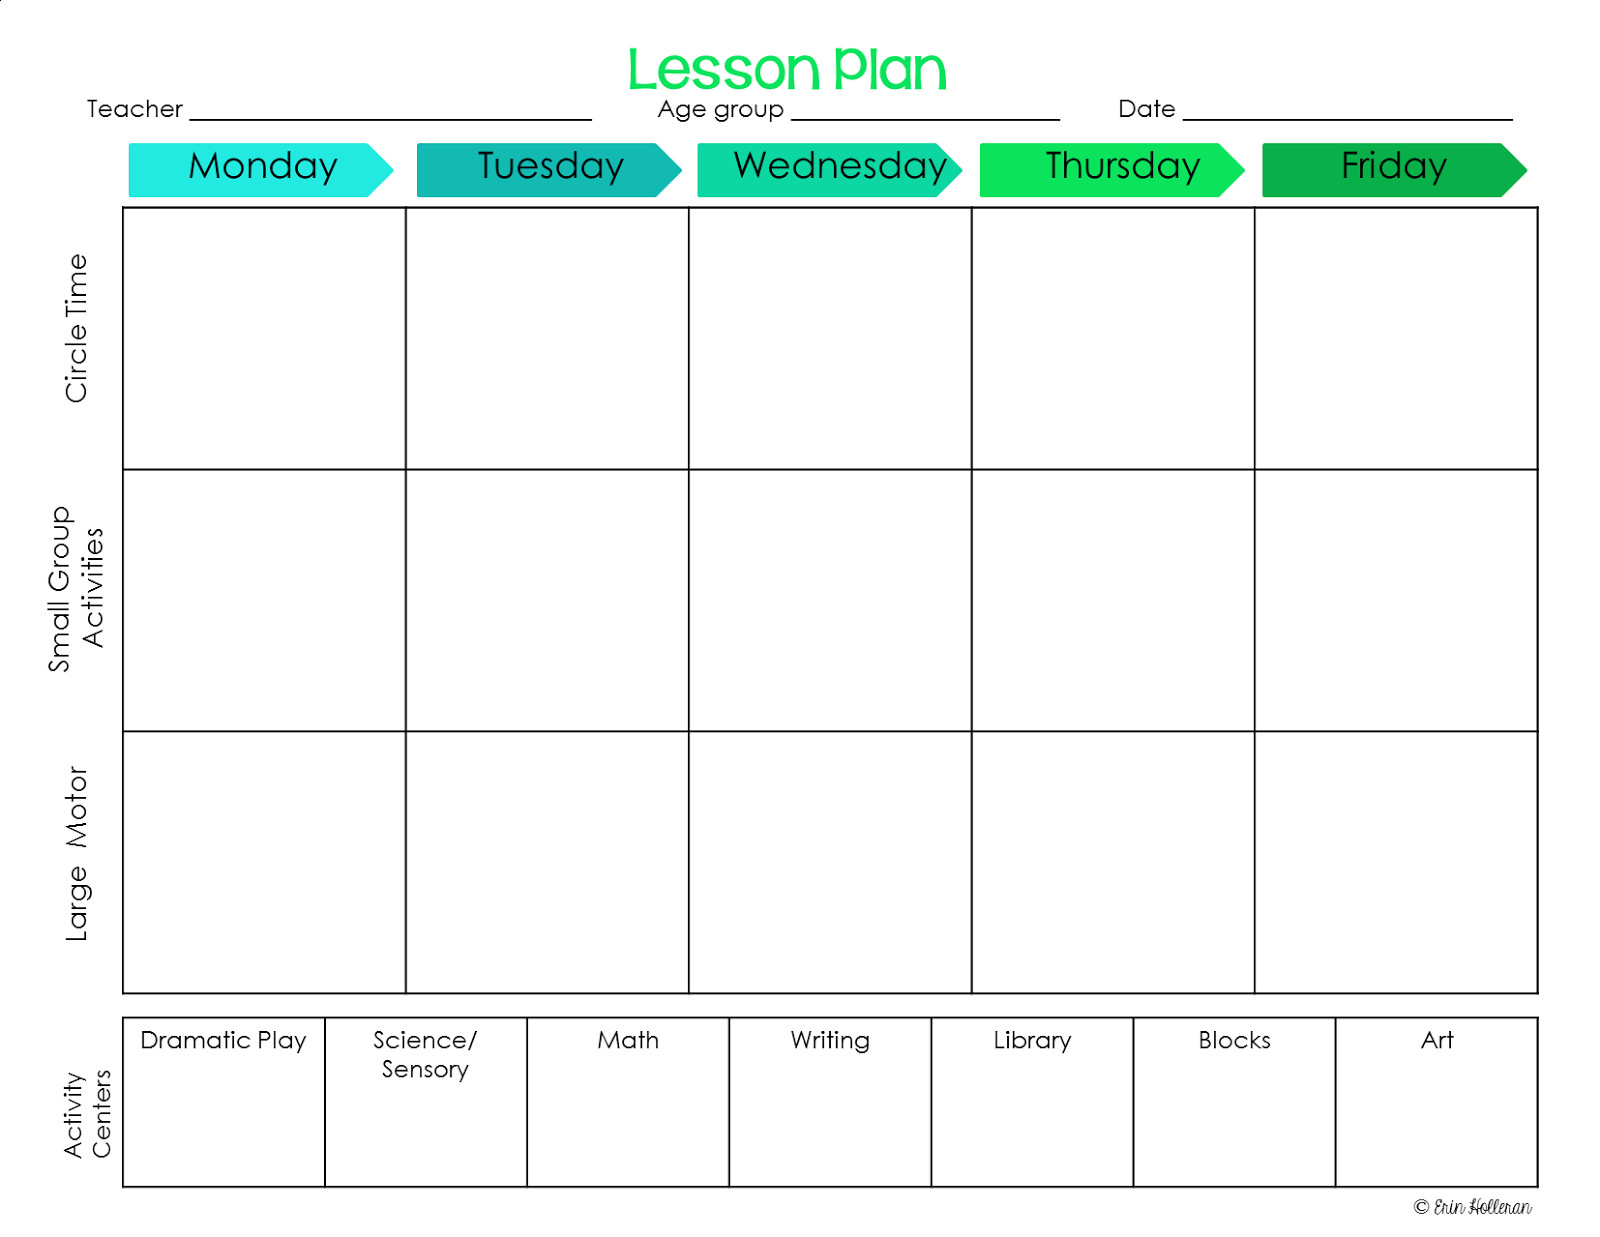 Free Lesson Plans Preschool Ponderings Make Your Lesson Plans Work for You